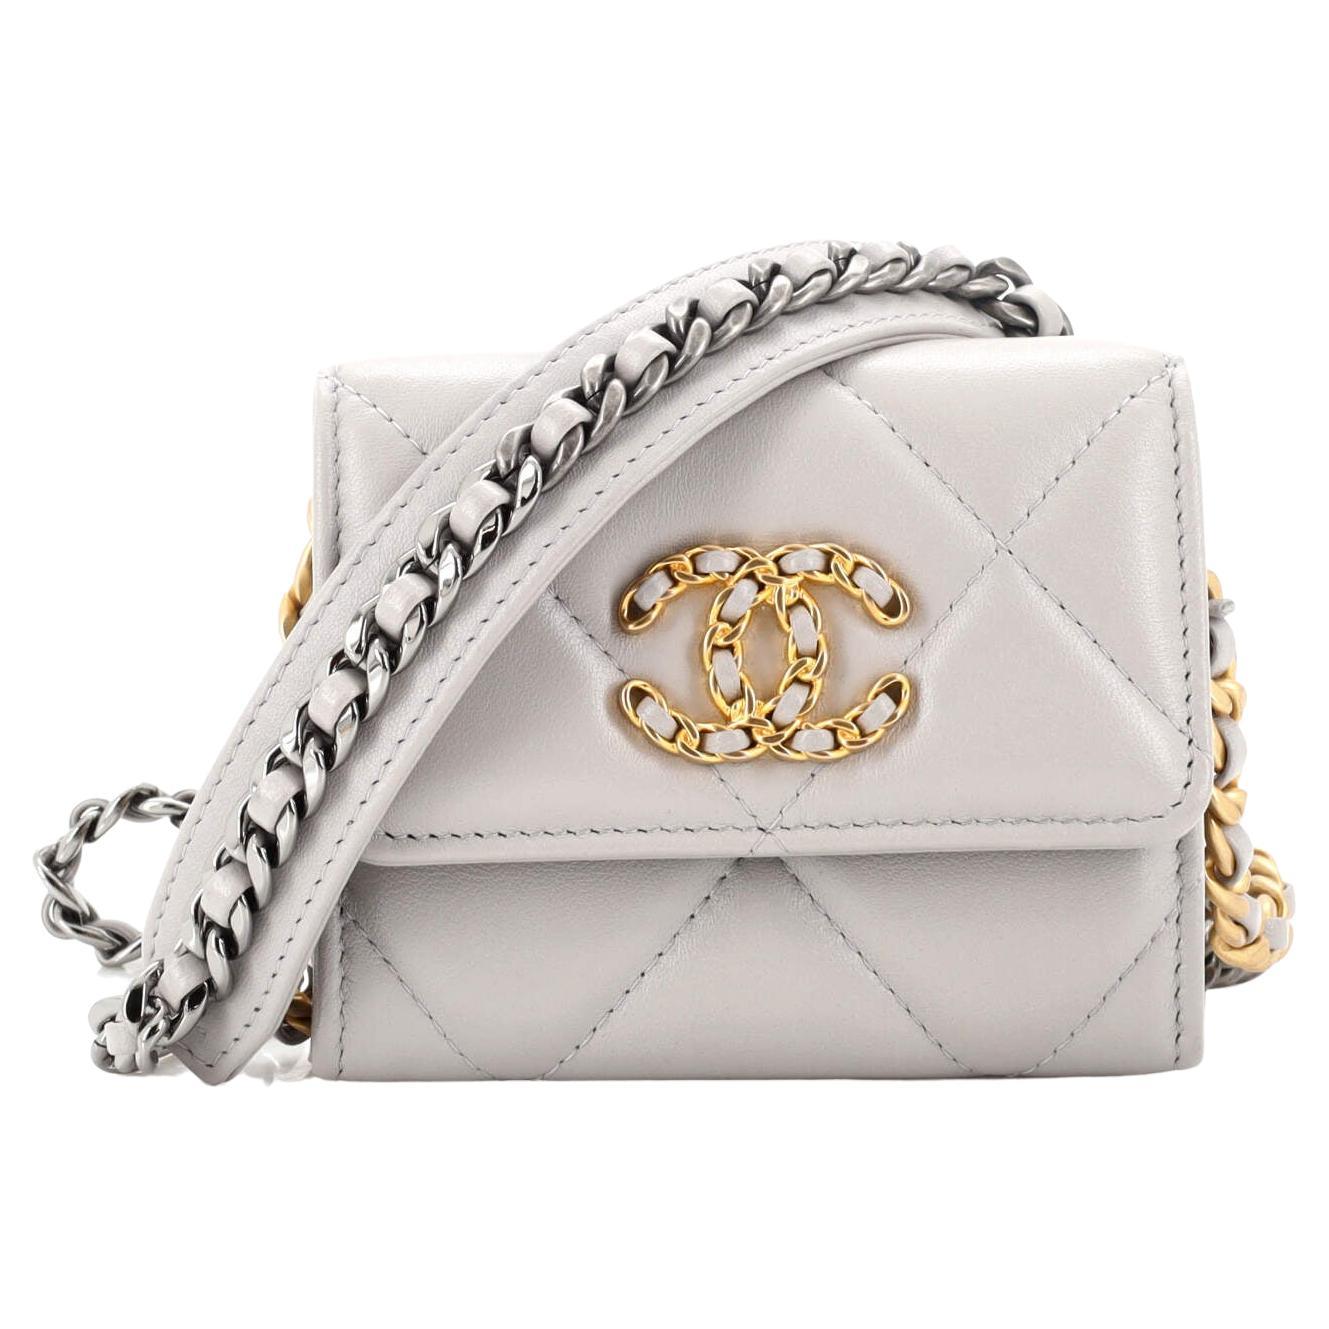 Chanel 19 Card Holder on Chain Quilted Lambskin